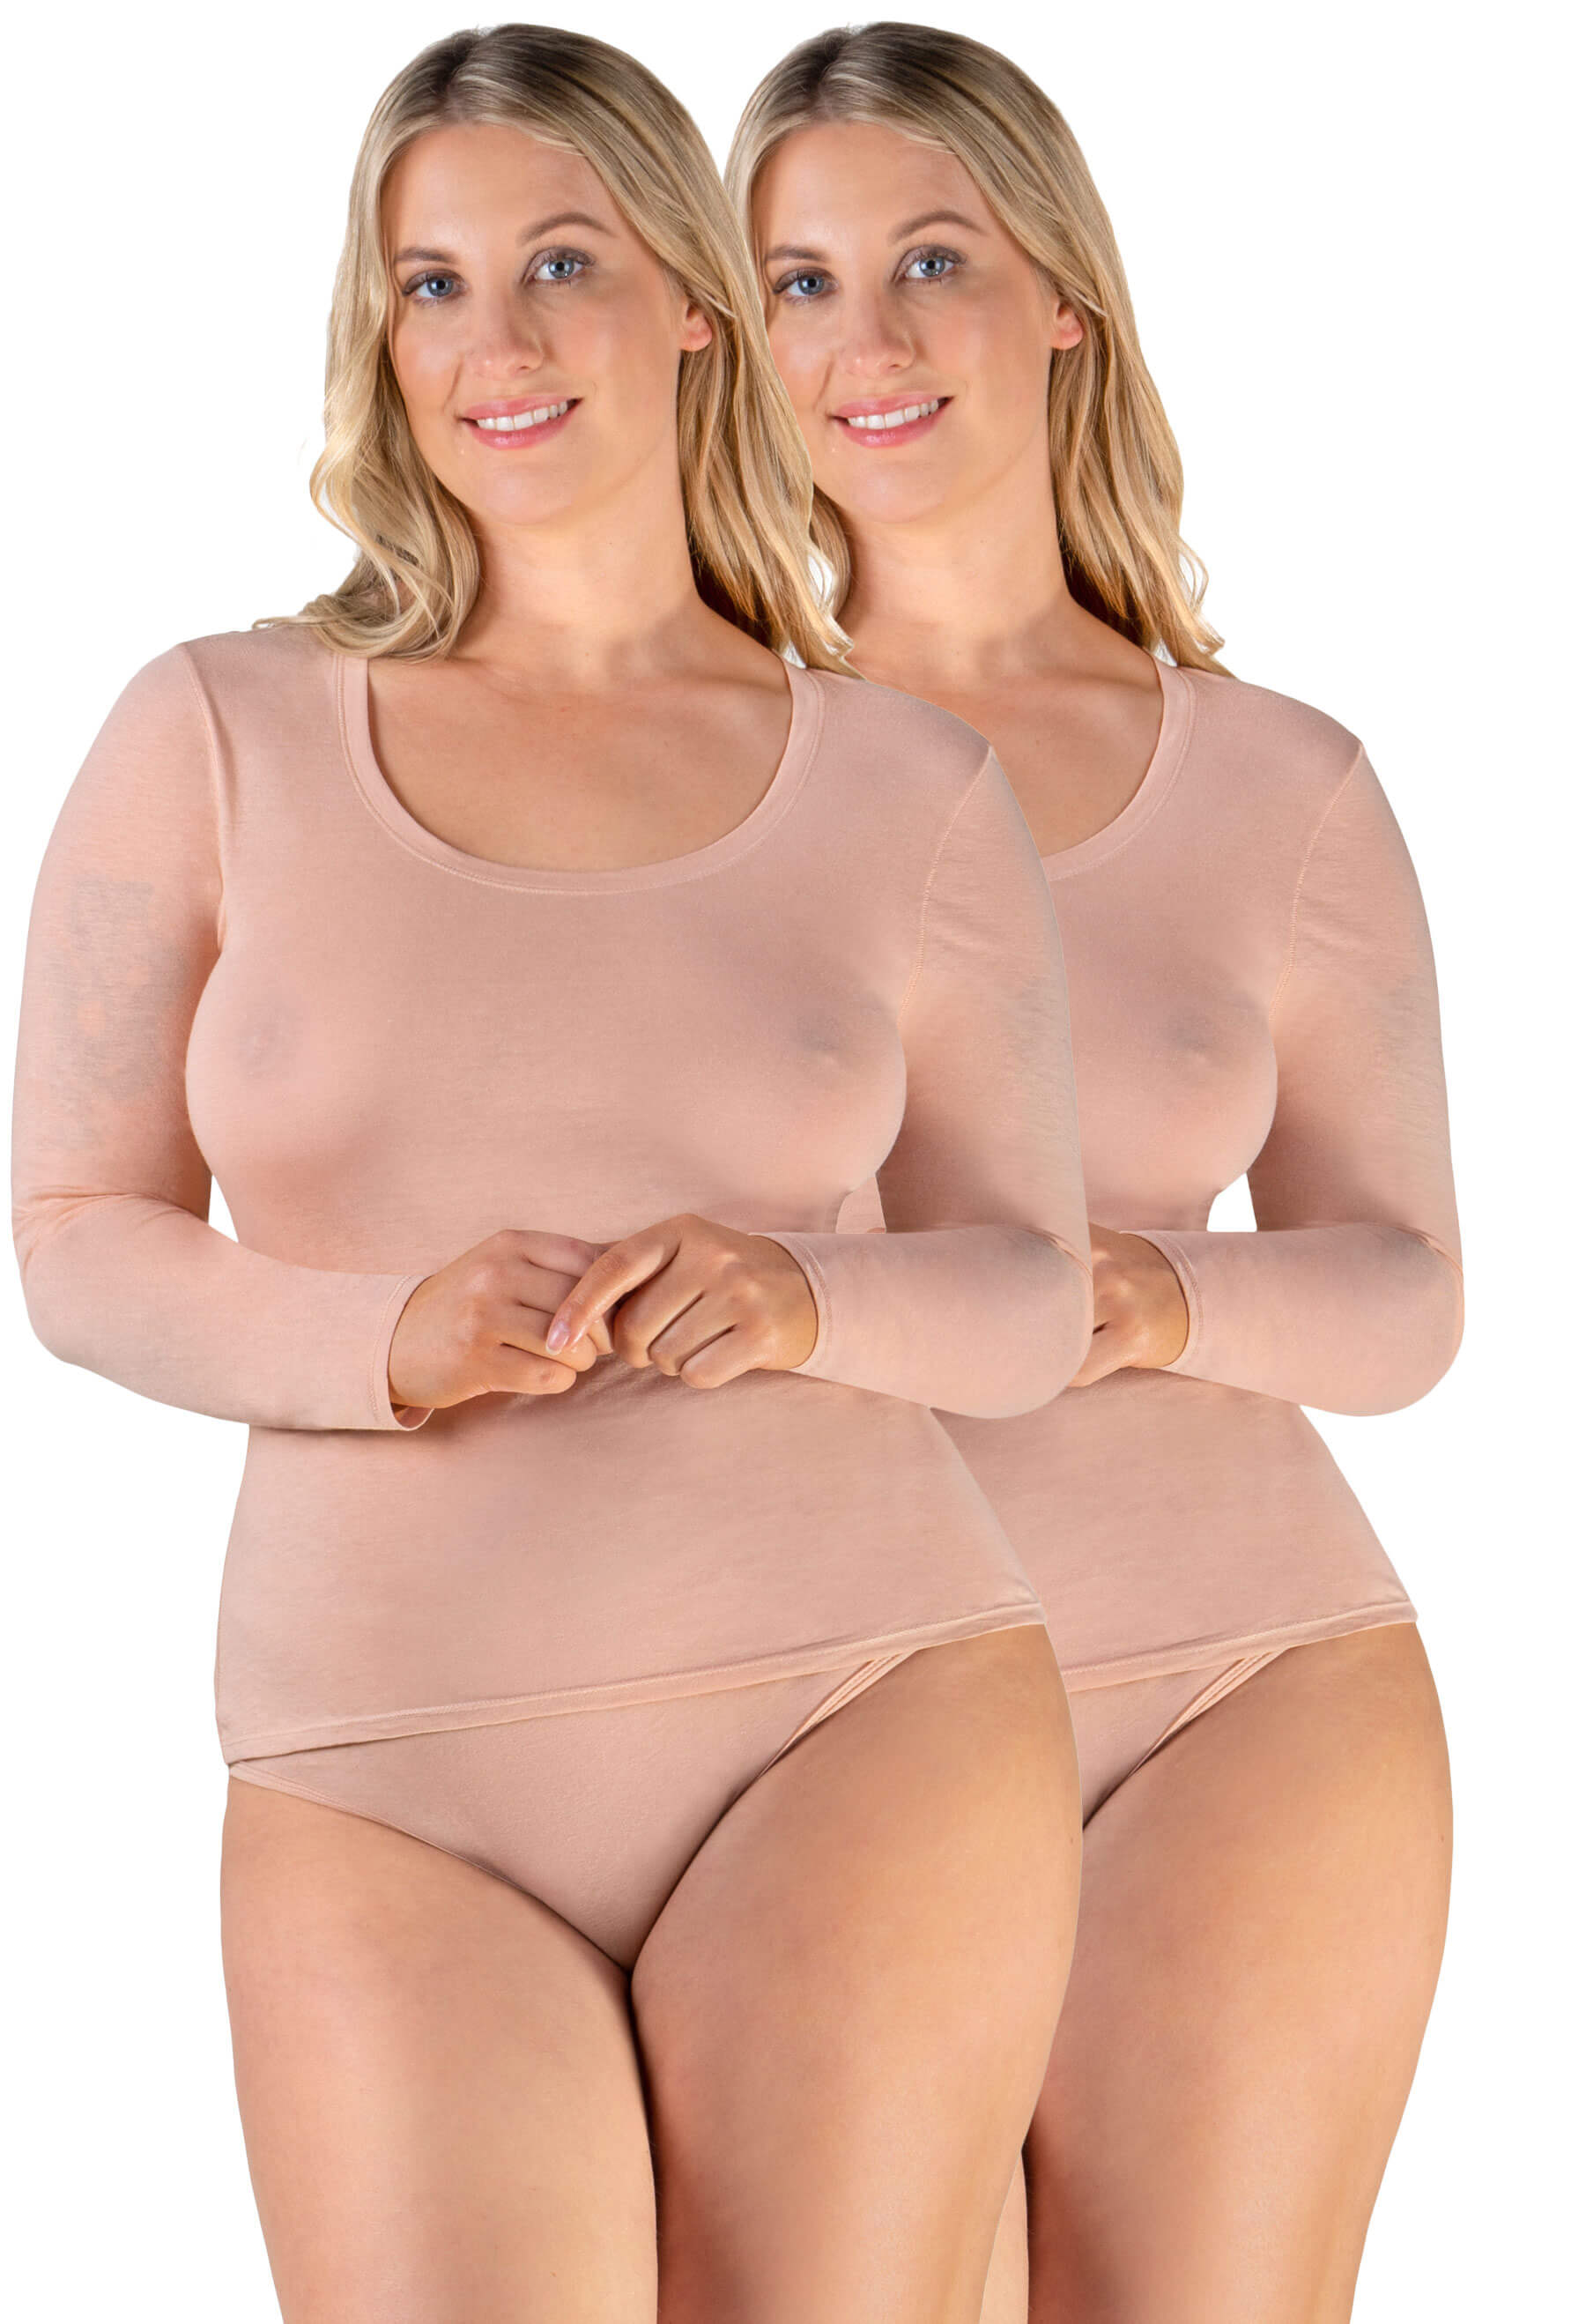 Superfine﻿ 100% BCI Cotton Long Sleeve Top, 2 Pack﻿﻿